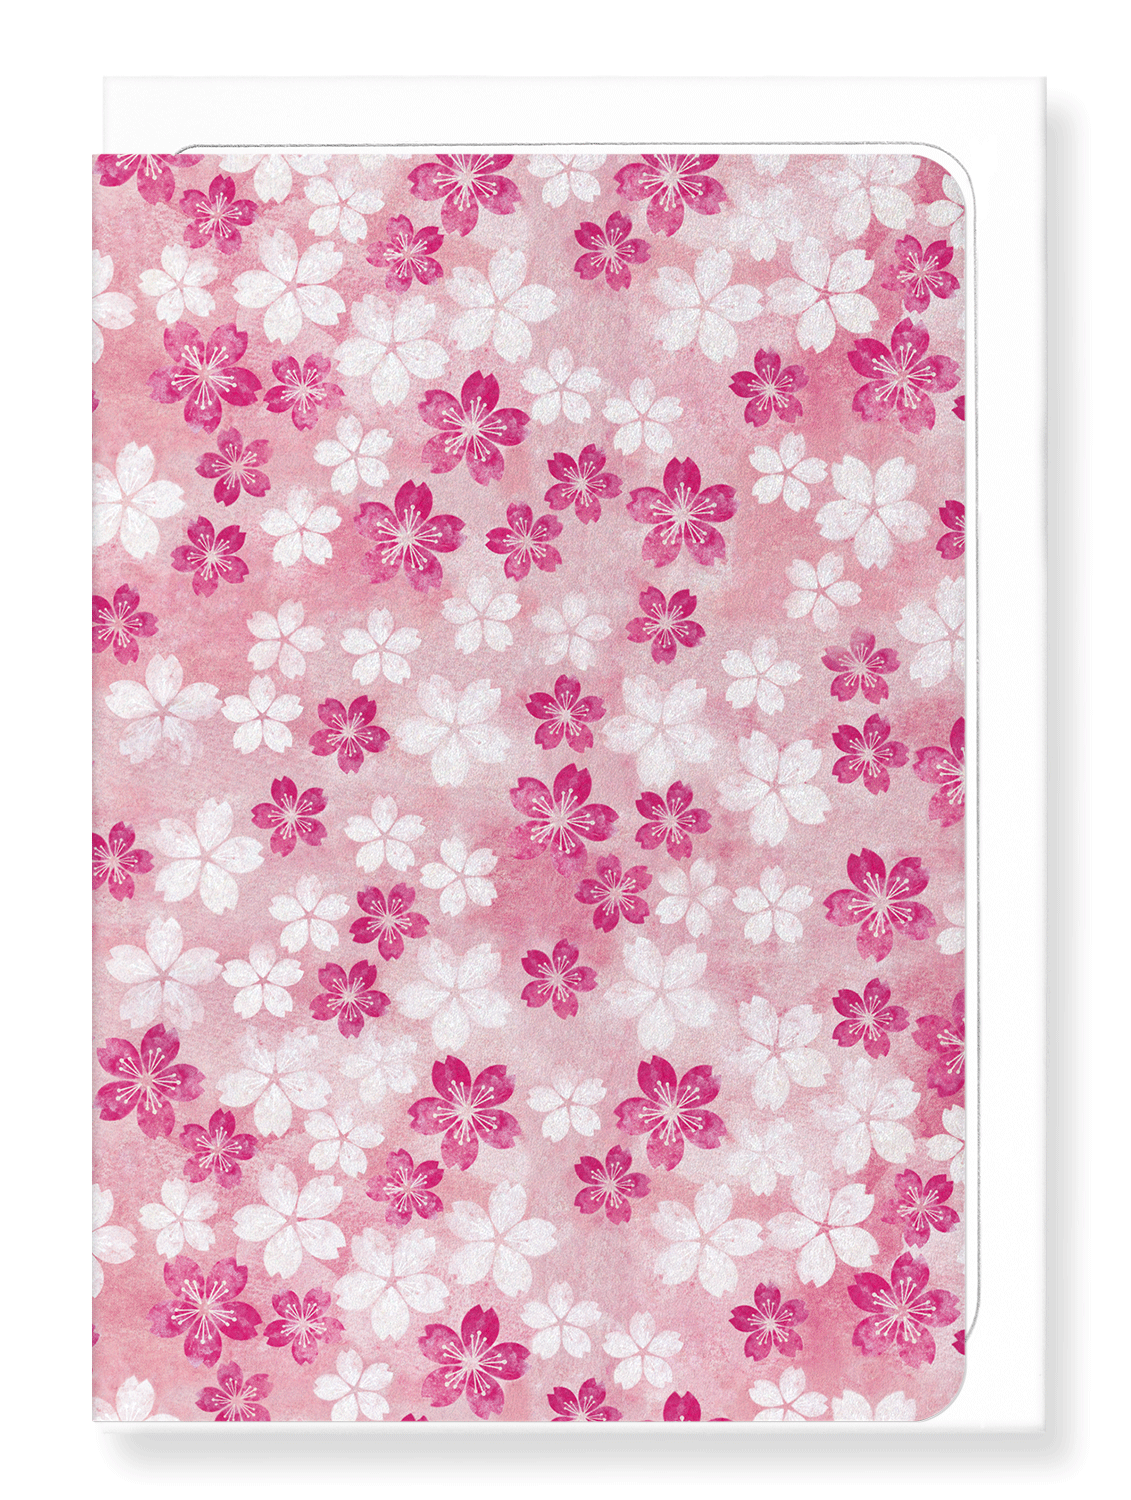 Ezen Designs - Cherry blossom on pink - Greeting Card - Front